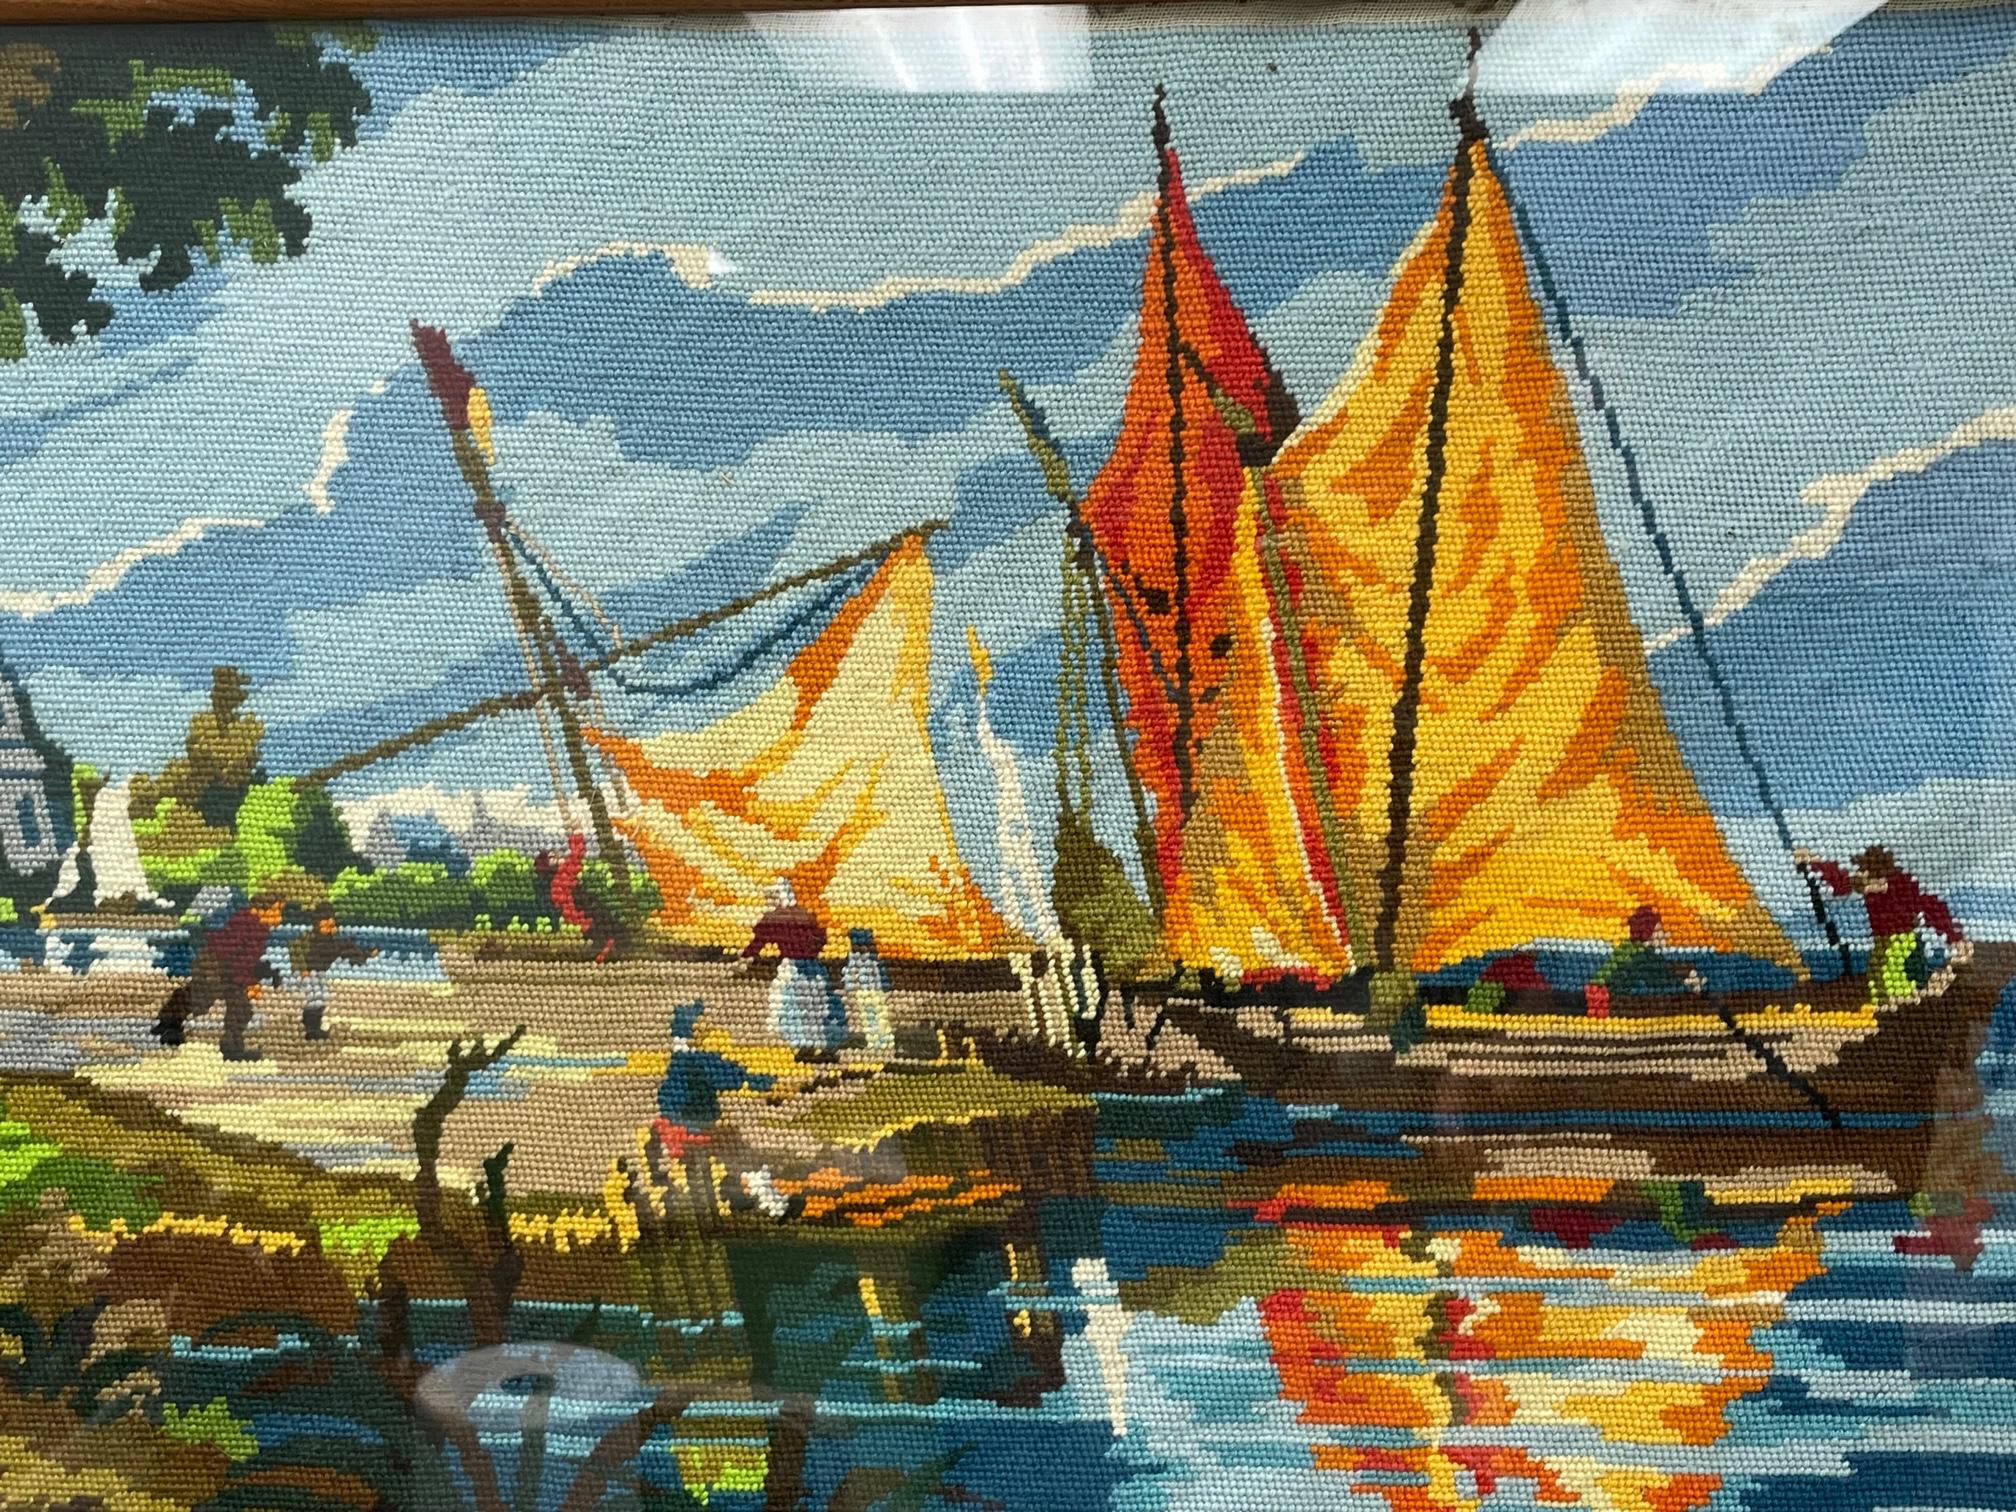 Vintage framed needlepoint features an intricate Asian river scene and a solid wood frame. Good condition with minor imperfections consistent with age, see photos for condition details.
For a shipping quote to your exact zip code, please message